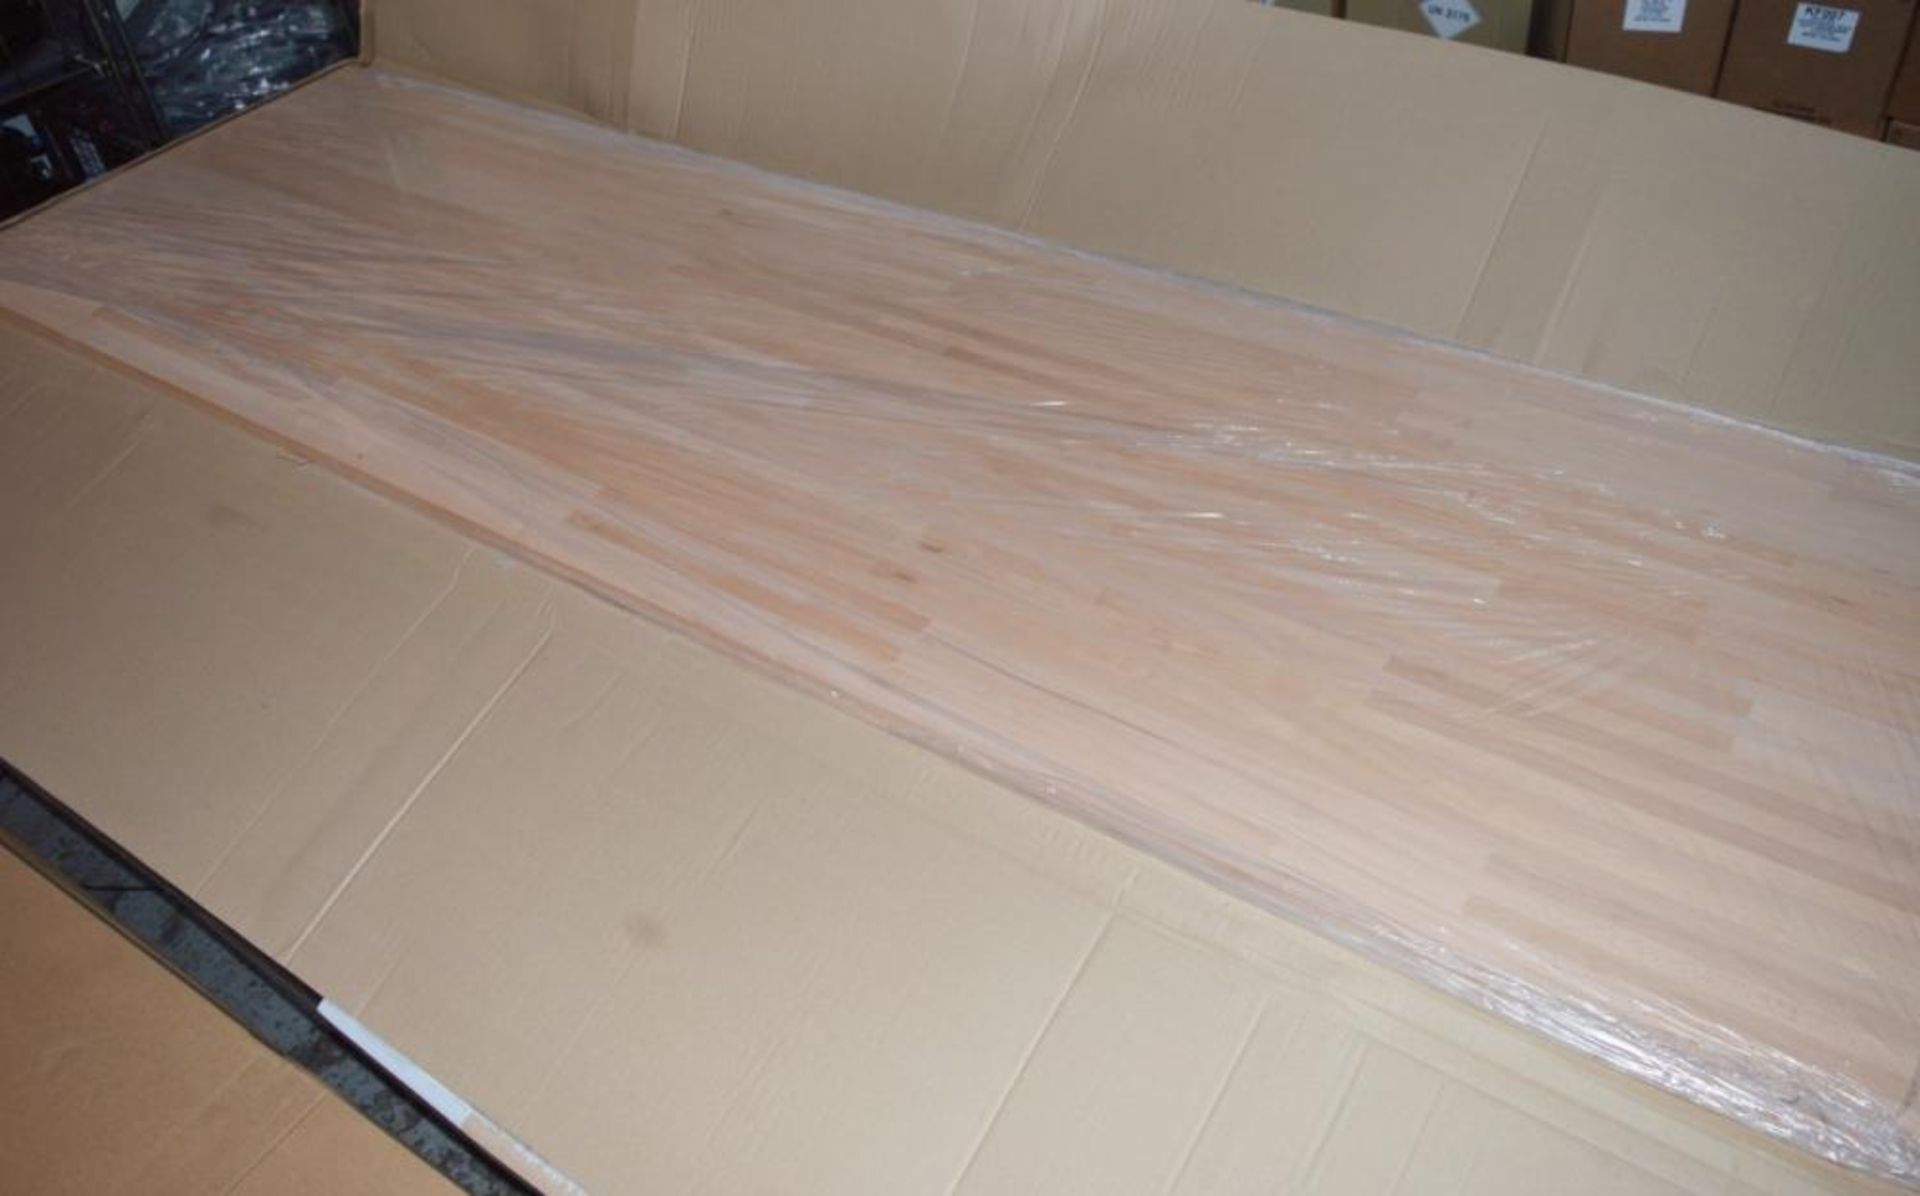 1 x Solid Wood Kitchen Worktop - PRIME BEECH - First Grade Finger Jointed Kitchen Worktop - Size: - Image 2 of 5